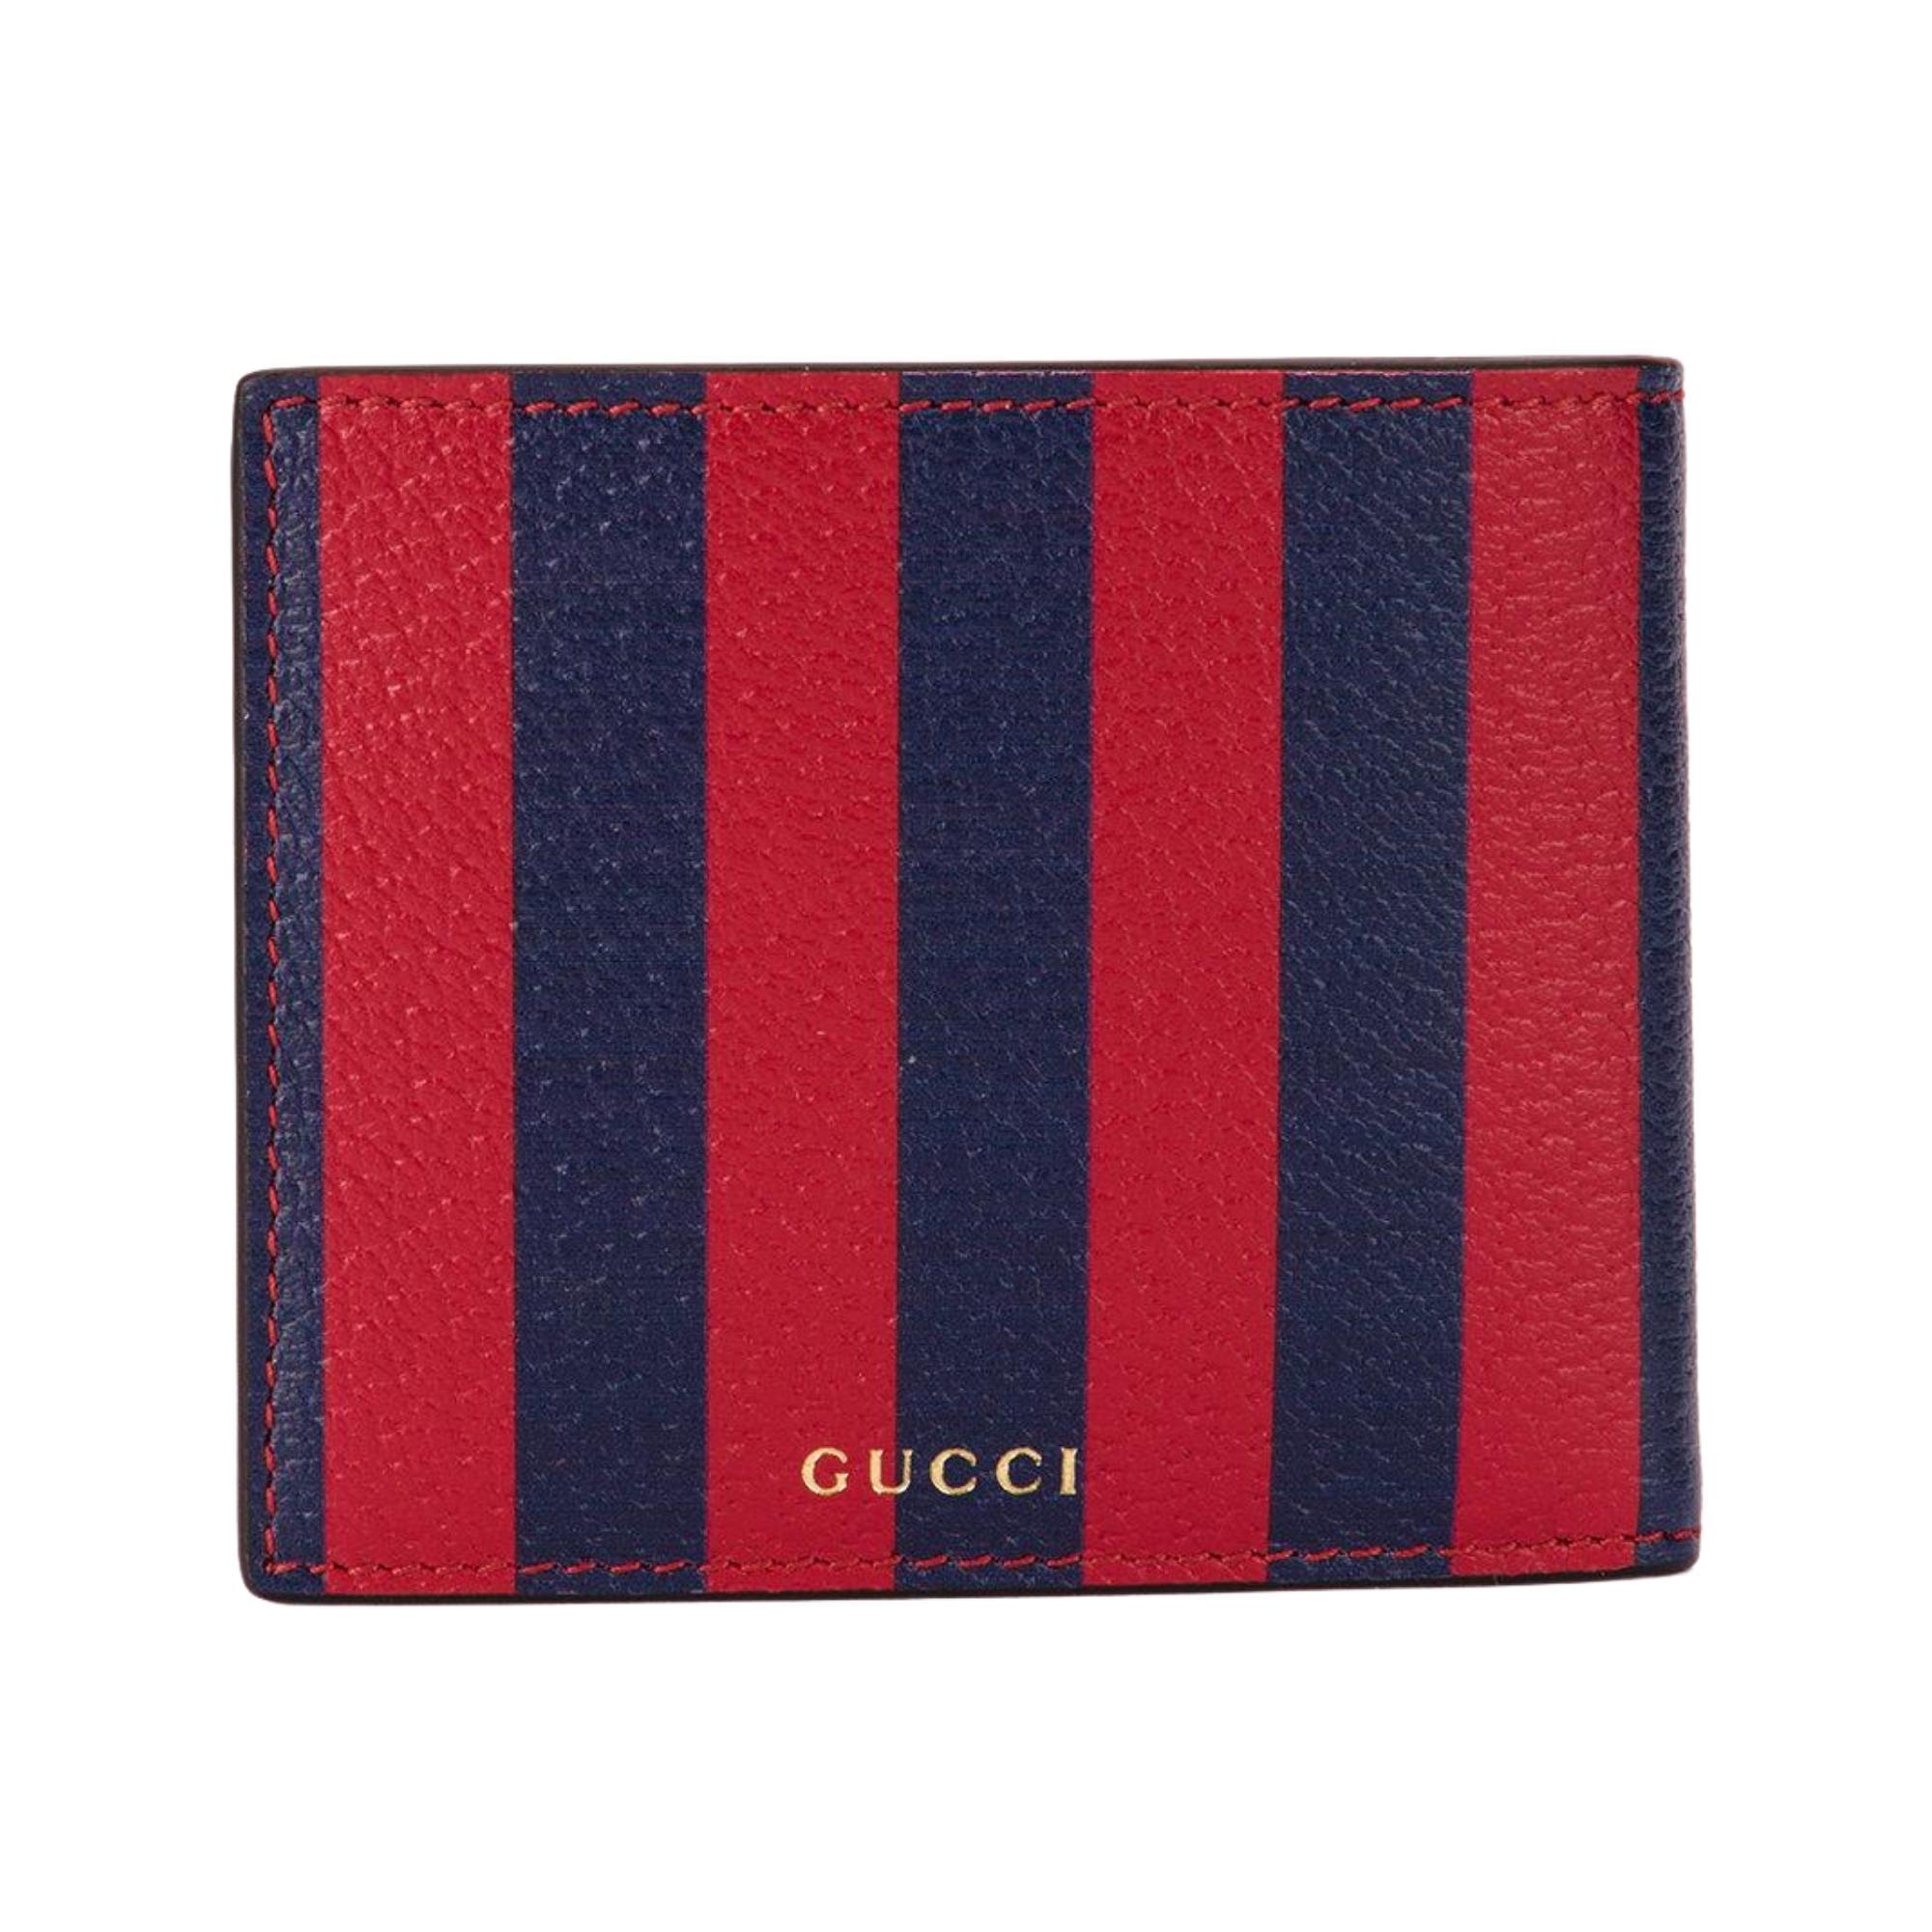 This red and dark blue canvas and leather Kingsnake print striped wallet features a striped print, interior card slots, a billfold compartment, an embossed internal logo stamp, Kingsnake printed logo at the front and a gold-tone 'Gucci' logo at the